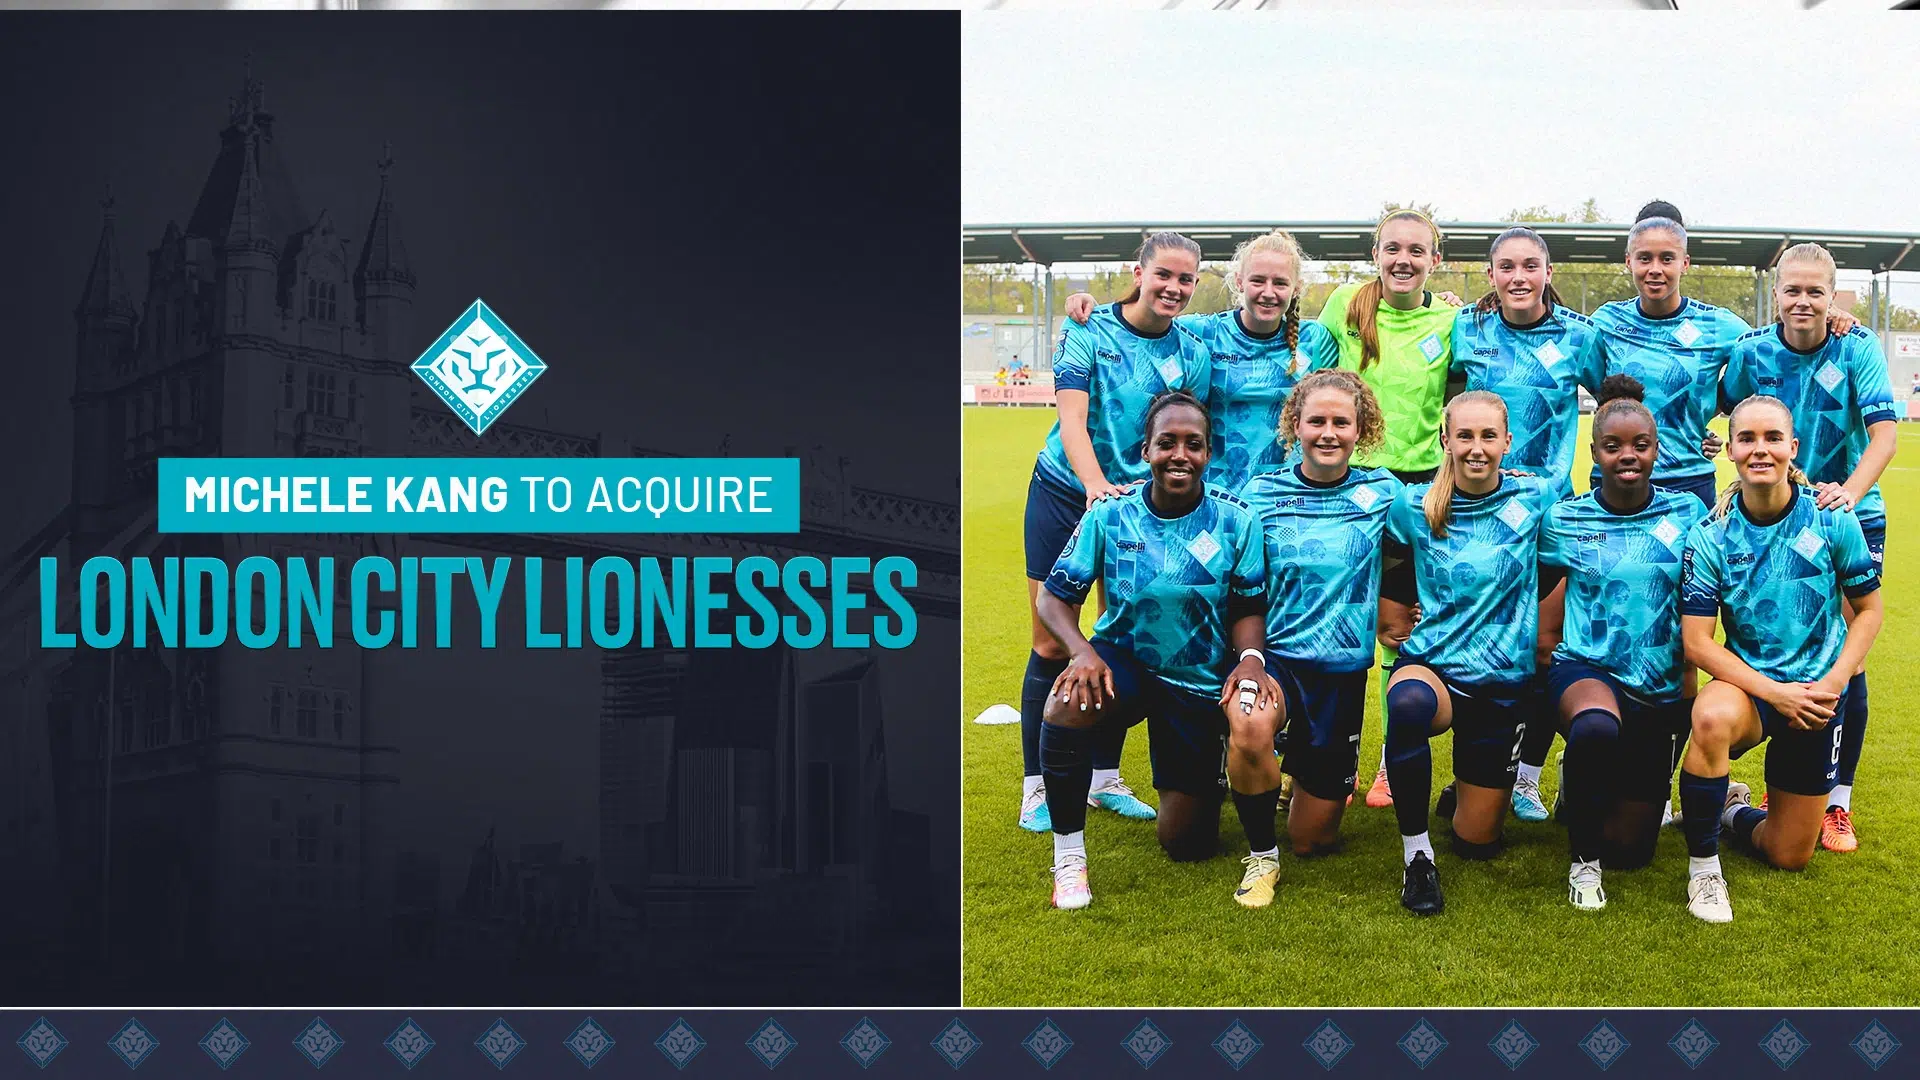 Michele Kang Acquires London City Lionesses Football Club Featured Image